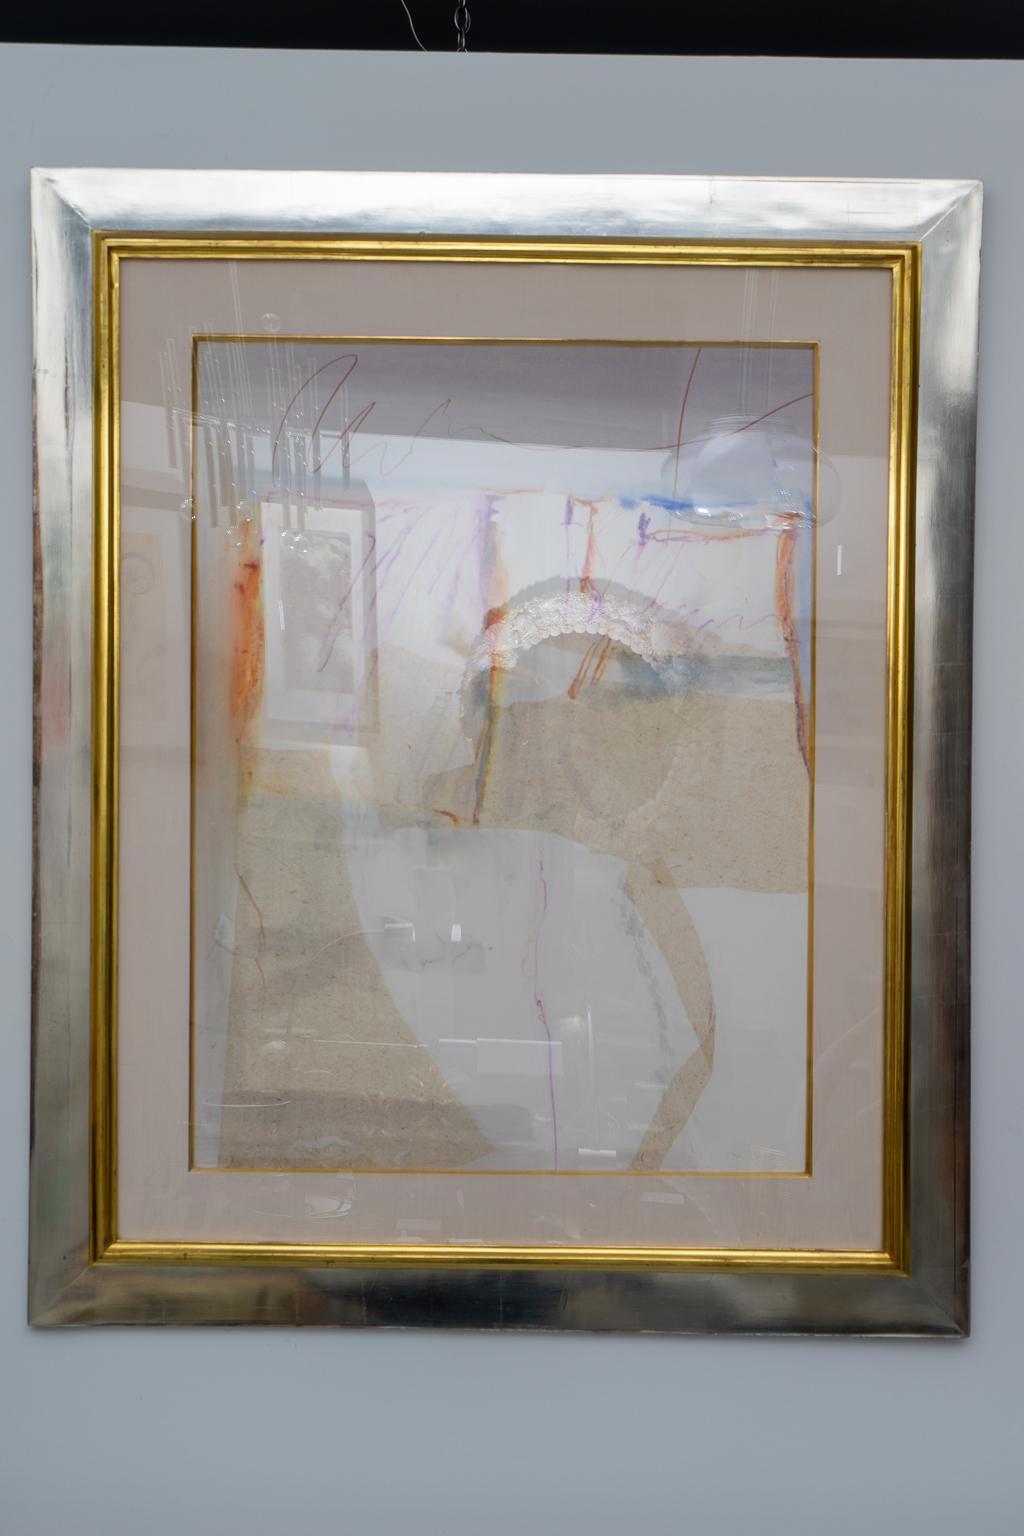 This stylish, large scale mixed media on paper artwork is by the American artist Harold Edward Larsen (b.1935) and was acquired from a Palm Beach estate. The colors are a soft whites, creams and terra cotta and the frame is a combination of silver